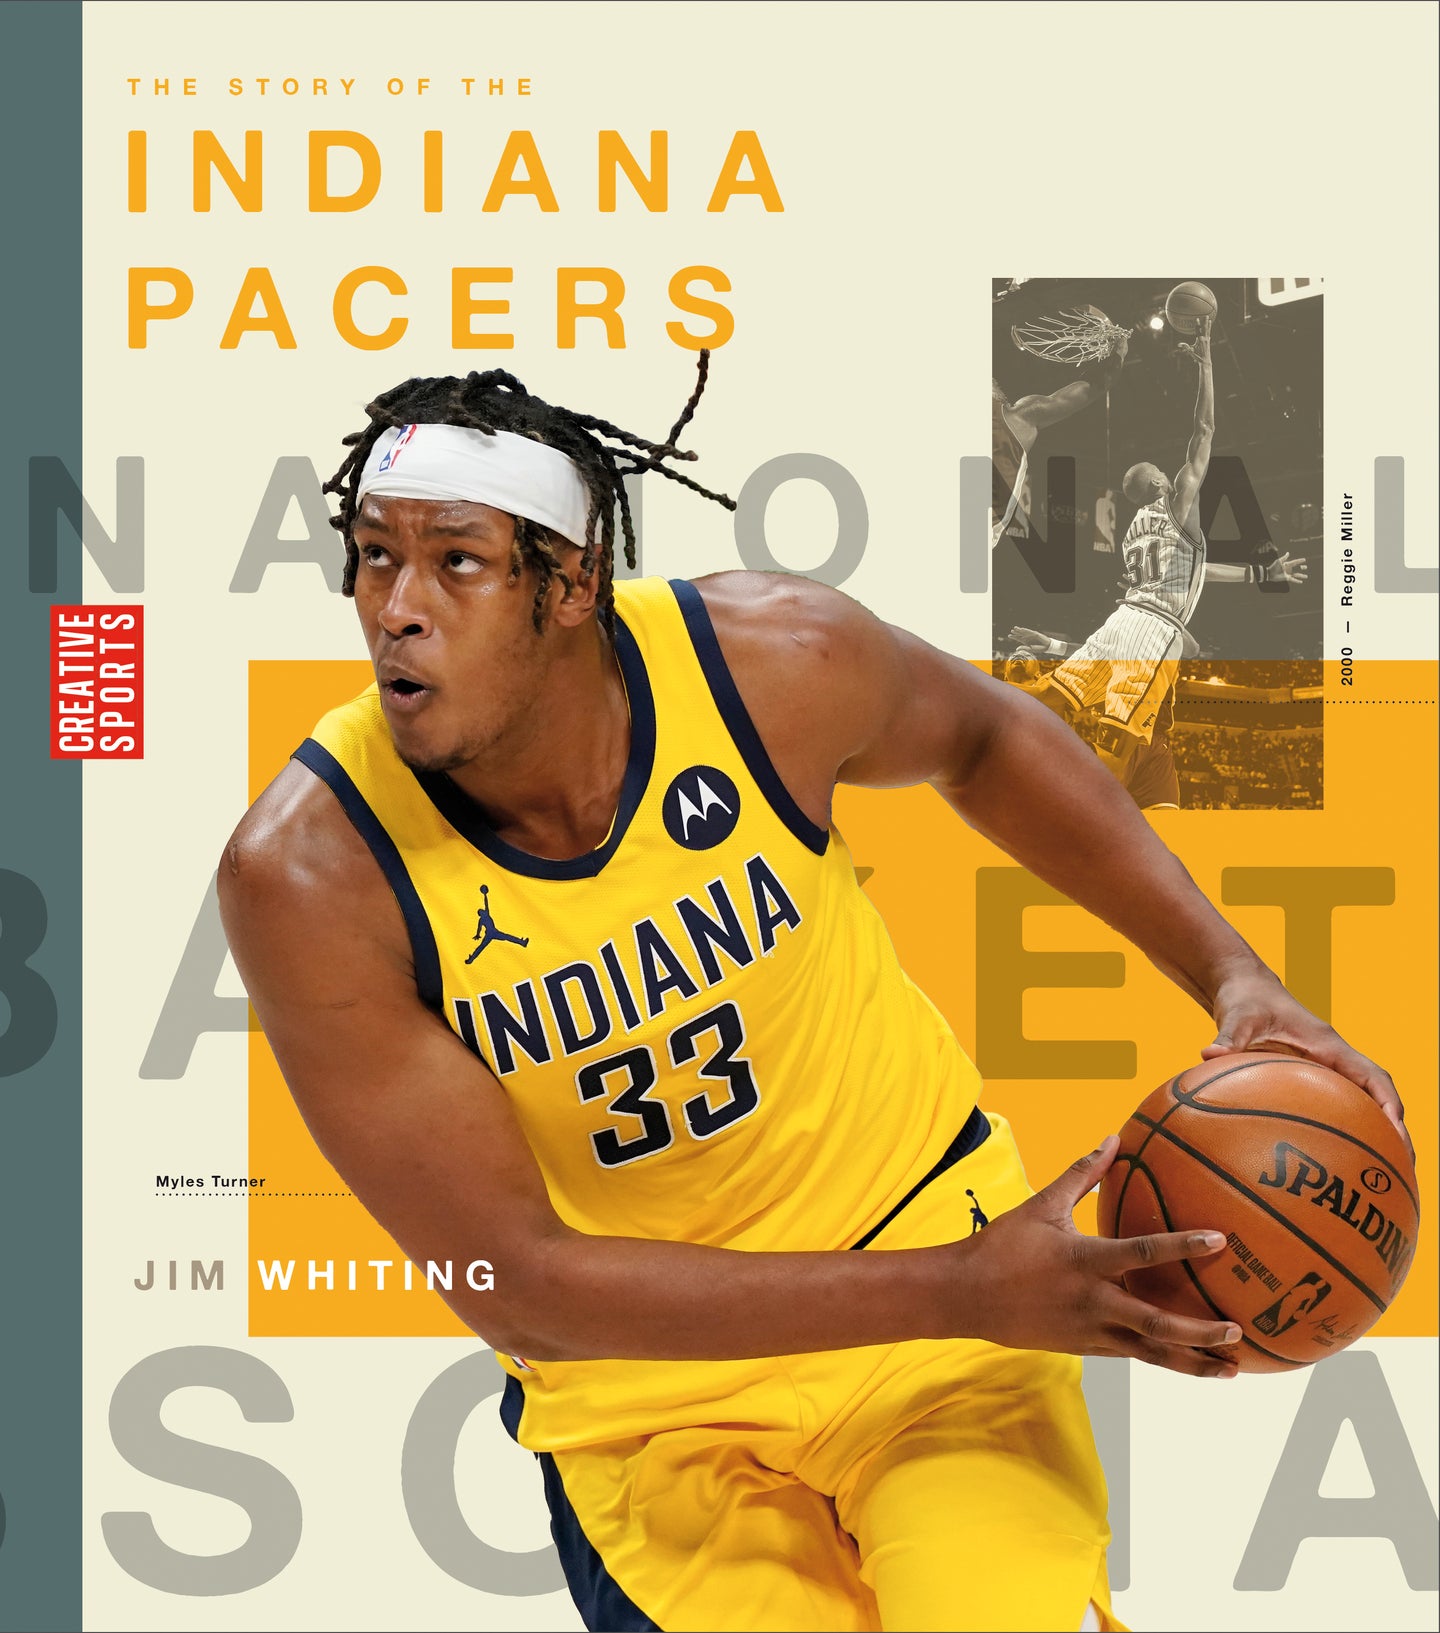 A History of Hoops (2023): The Story of the Indiana Pacers